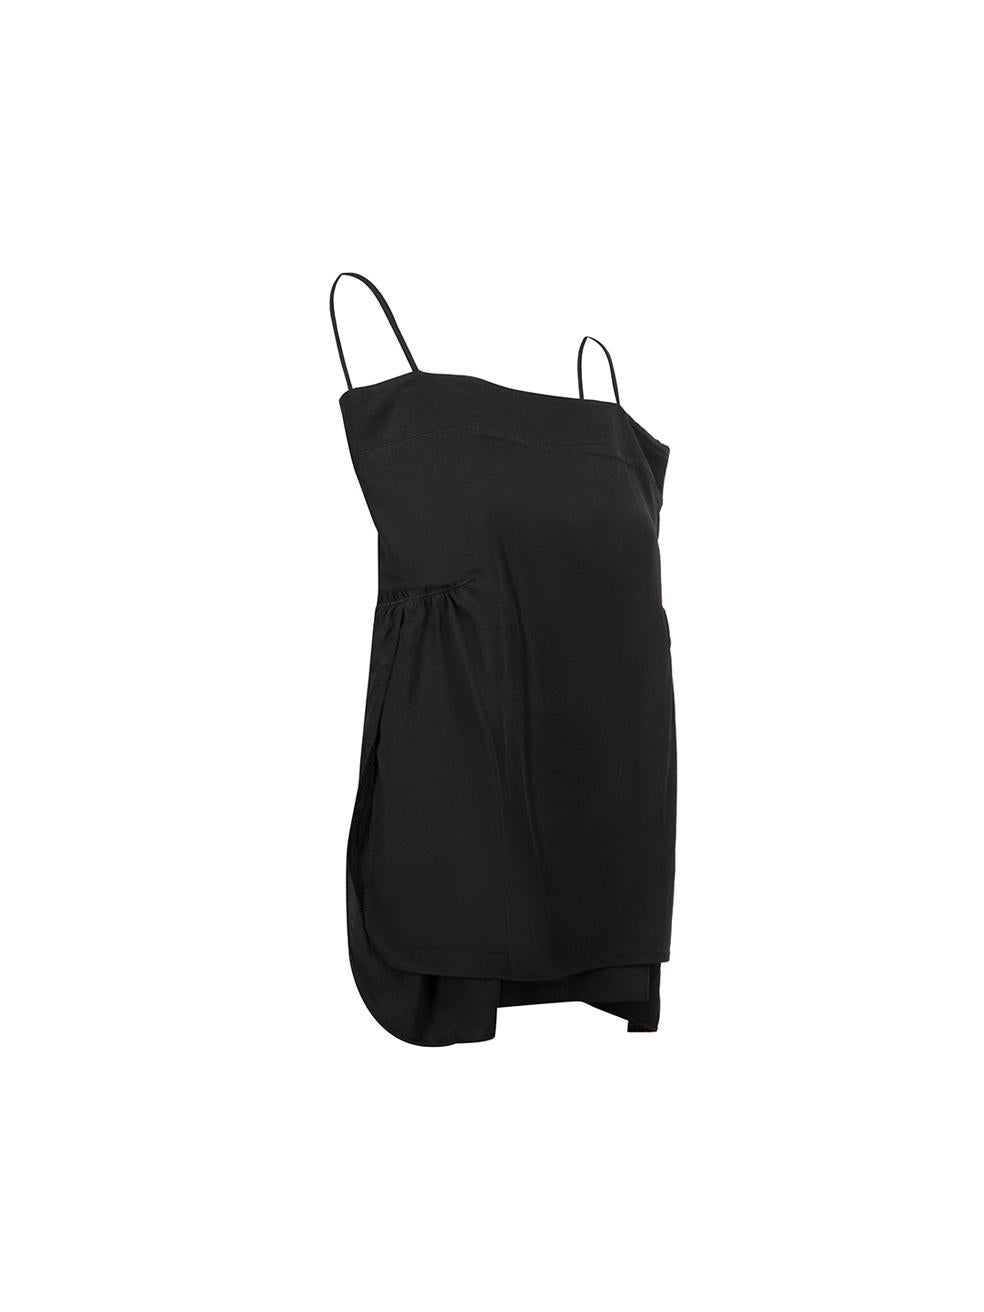 CONDITION is Very good. Hardly any visible wear to top is evident on this used Helmut Lang designer resale item. 



Details


Black

Silk

Tank top

Spaghetti strapped

Gathered accent

Side slits





Made in China



Composition

93% Silk and 7%